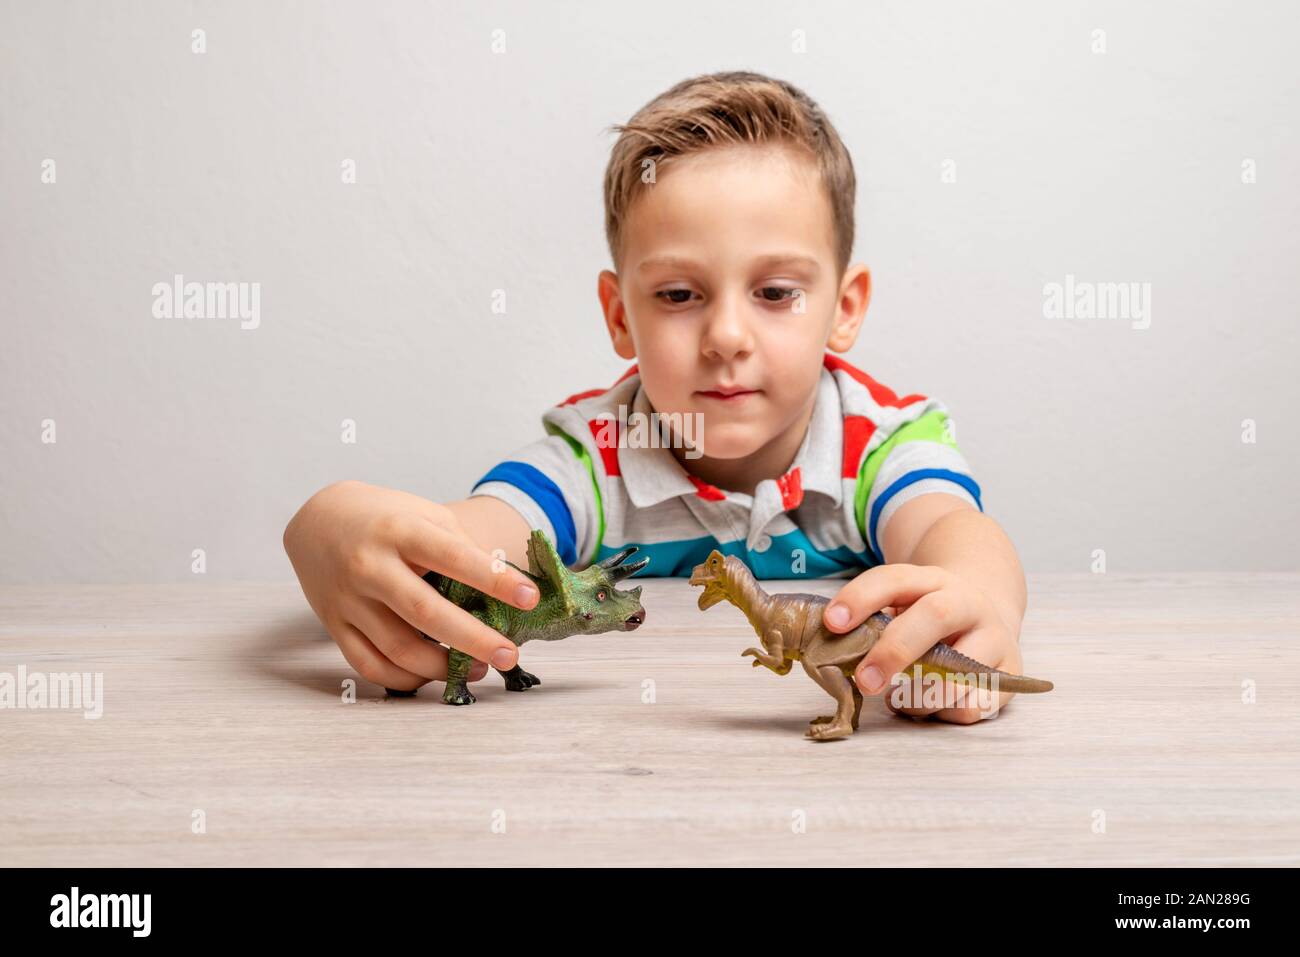 Boy holding dinosaur toys. Concept of developing attention in children through play Stock Photo